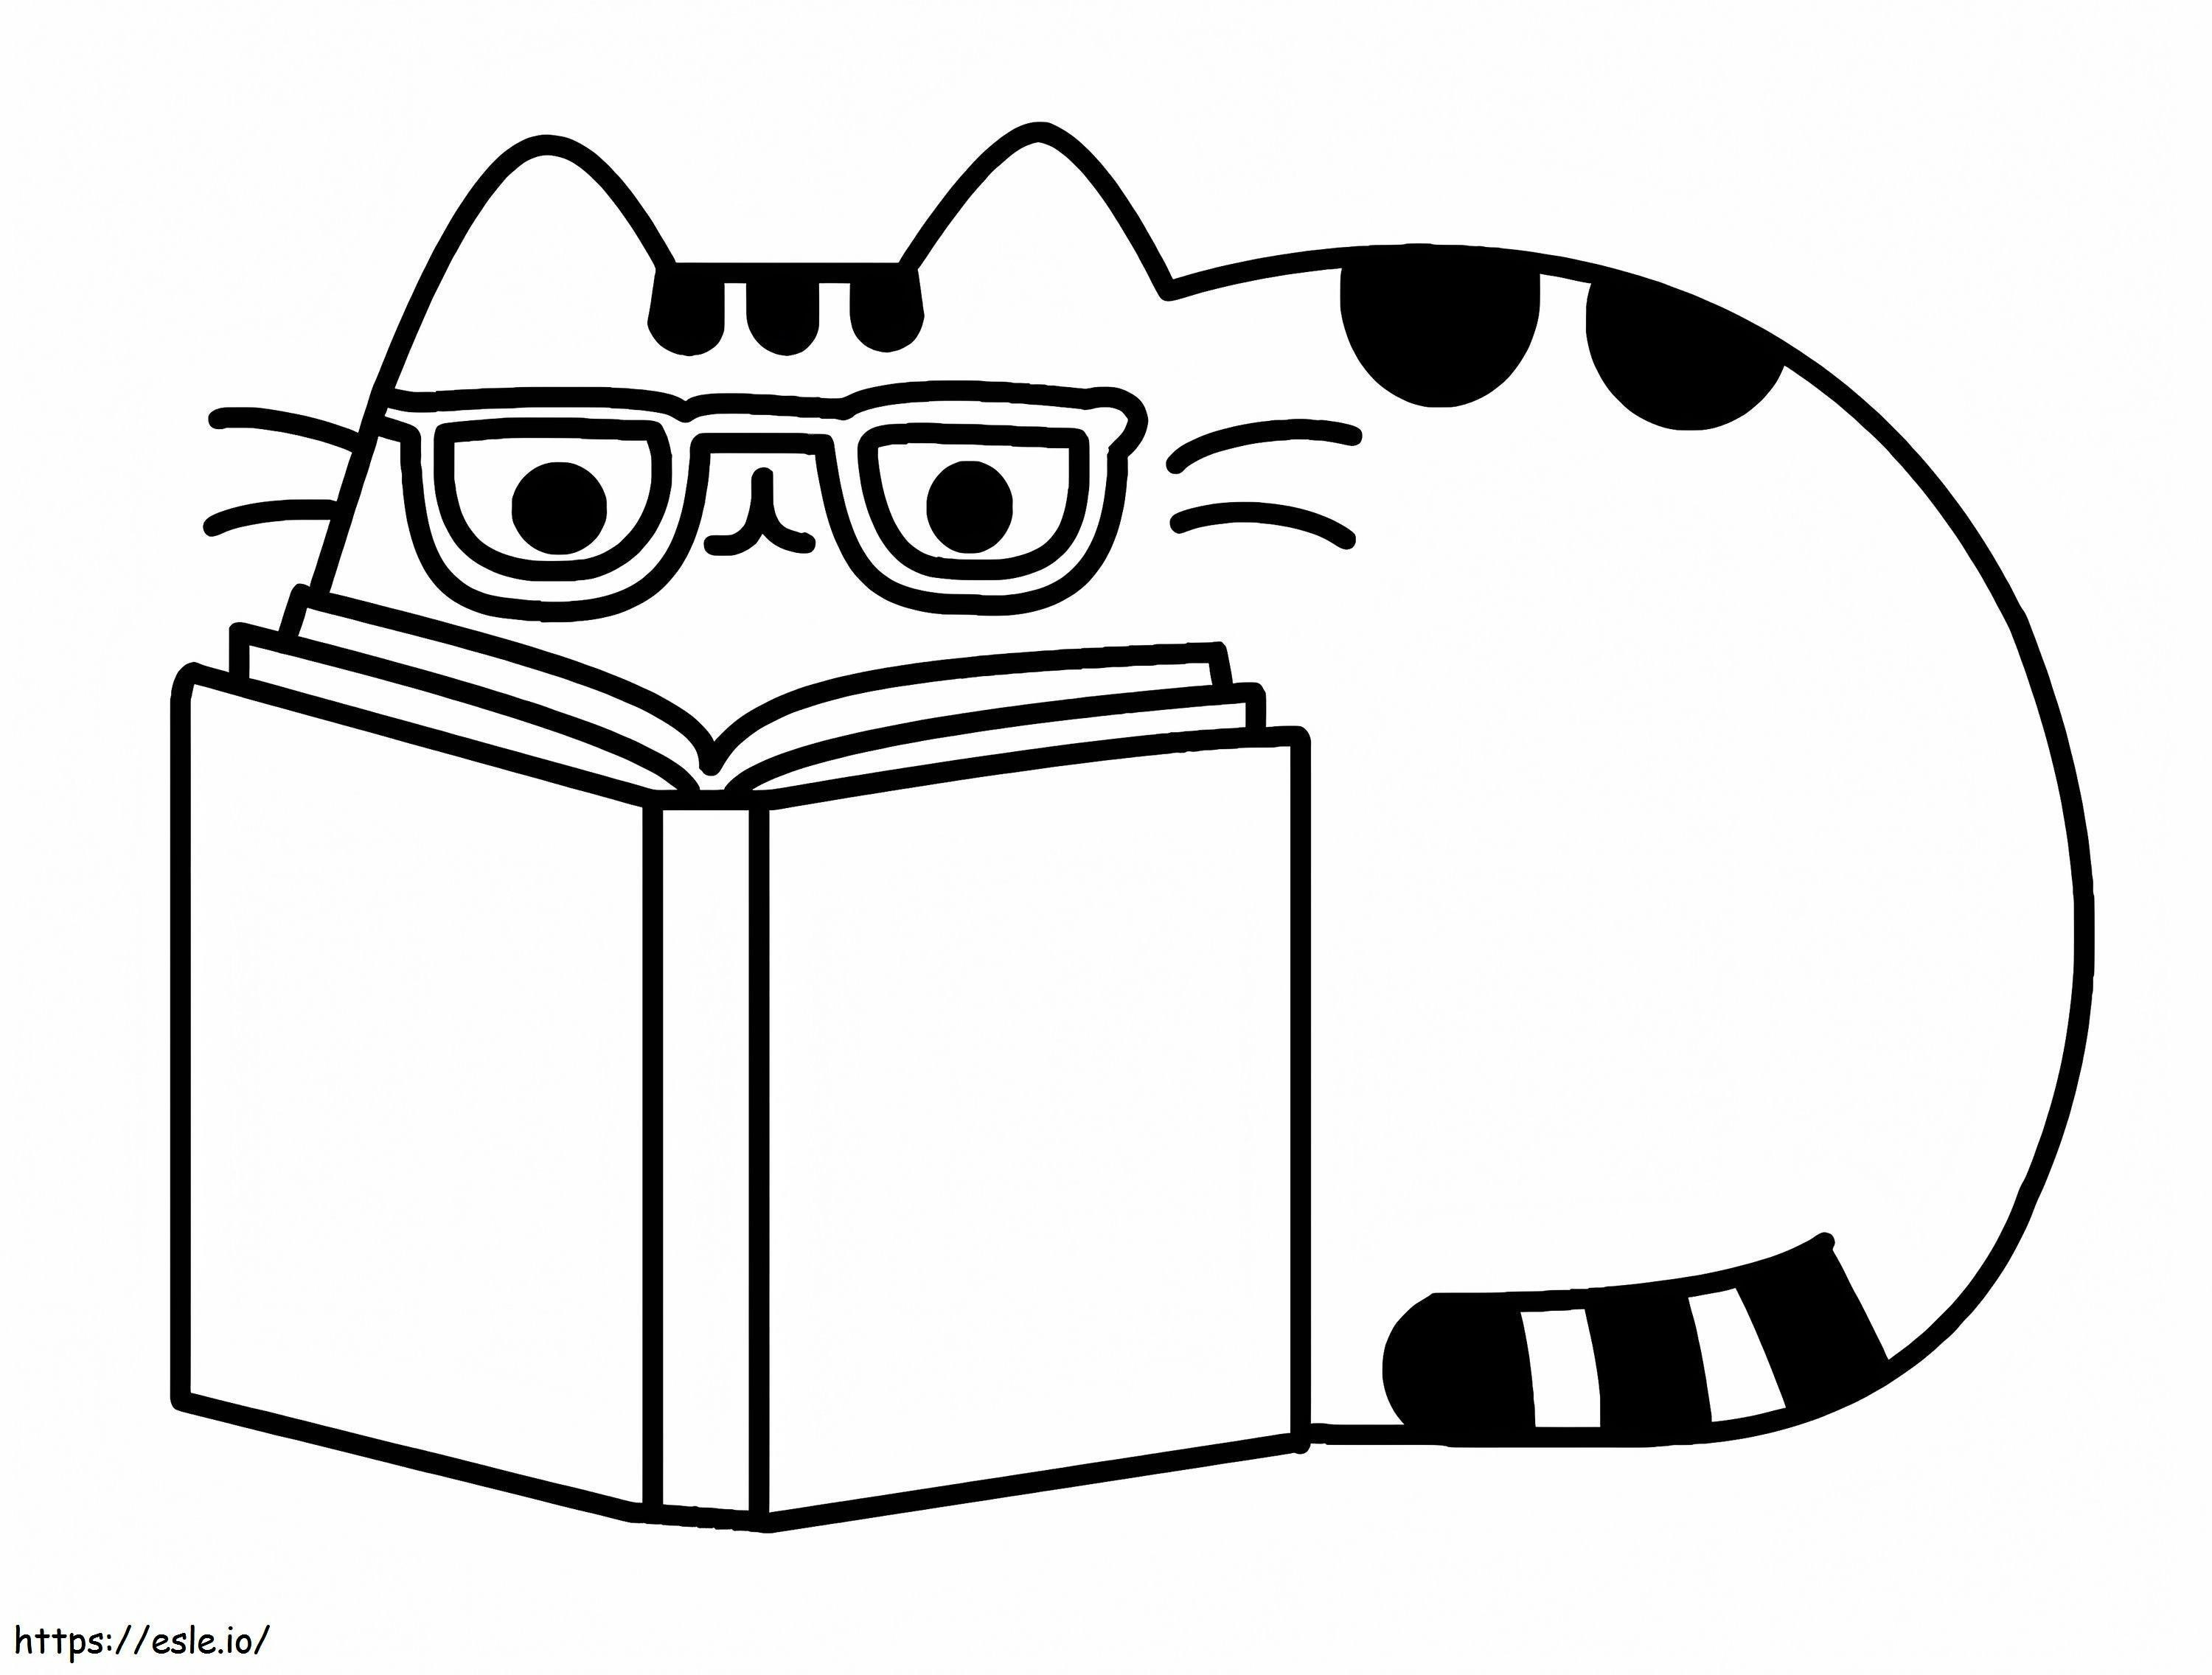 Adorable Pusheen 5 coloring page